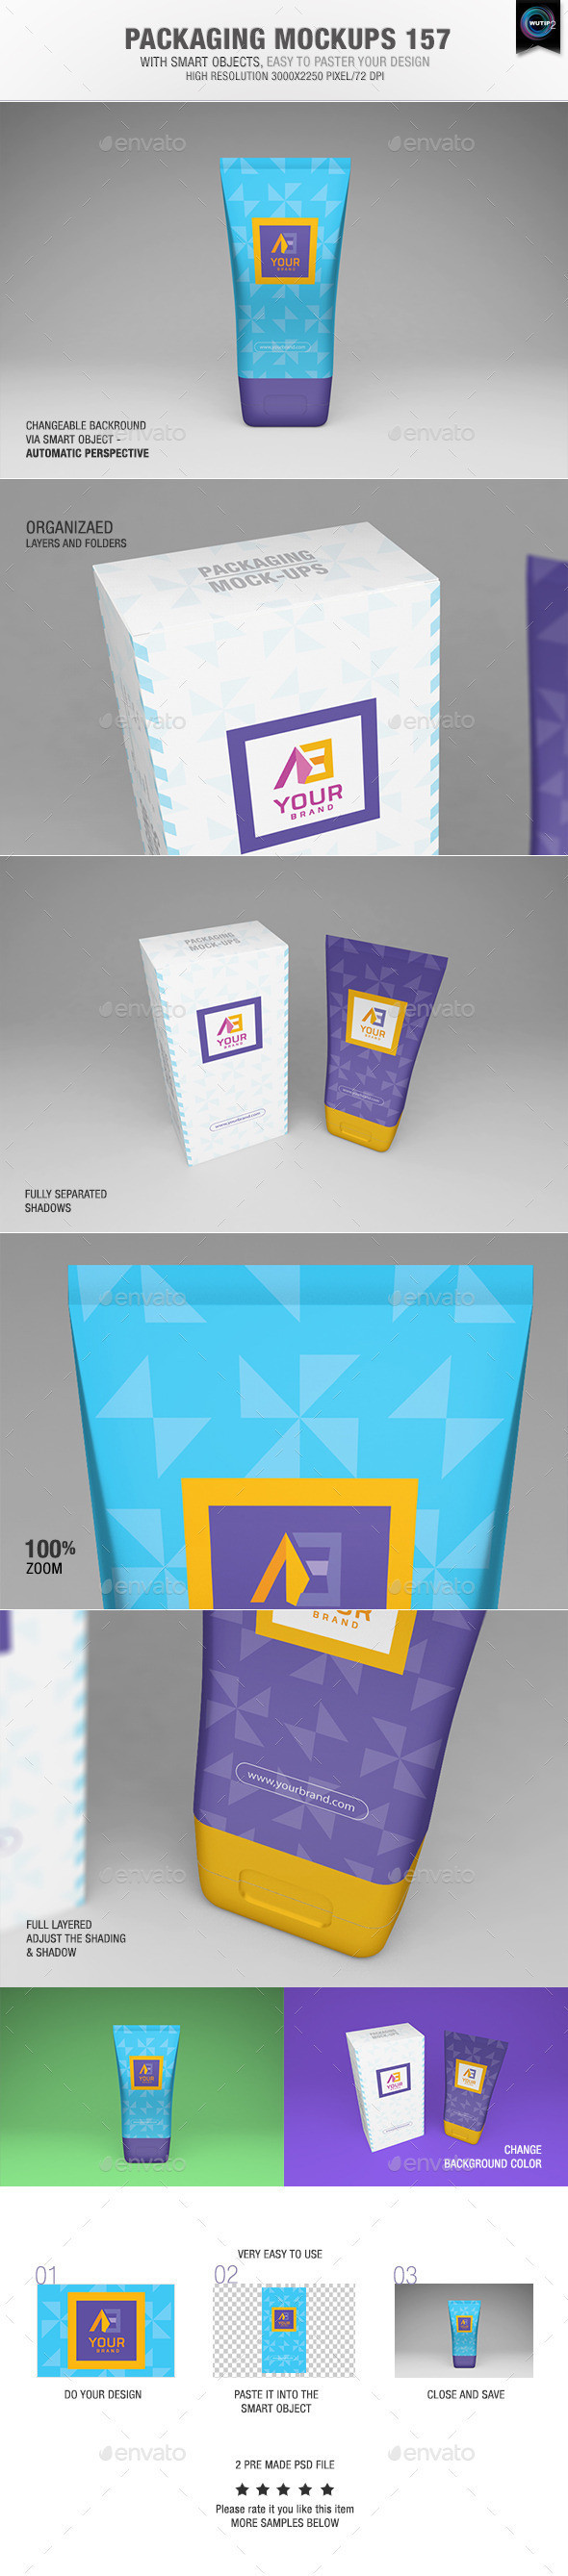 Packaging 20mockups 20157 20preview